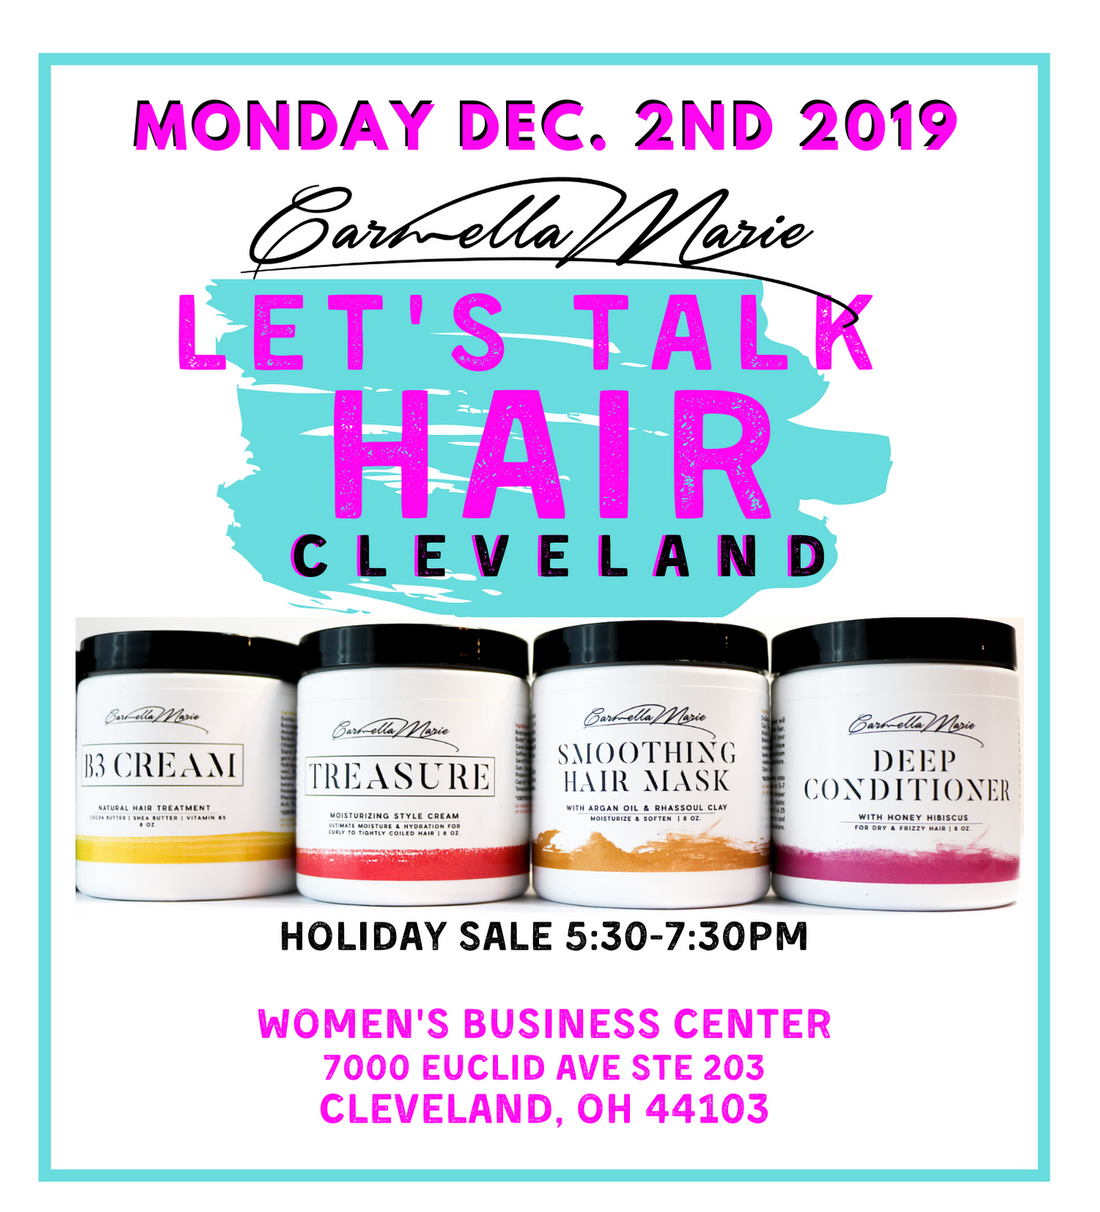 We want see you at the Cleveland Pop Up Event!